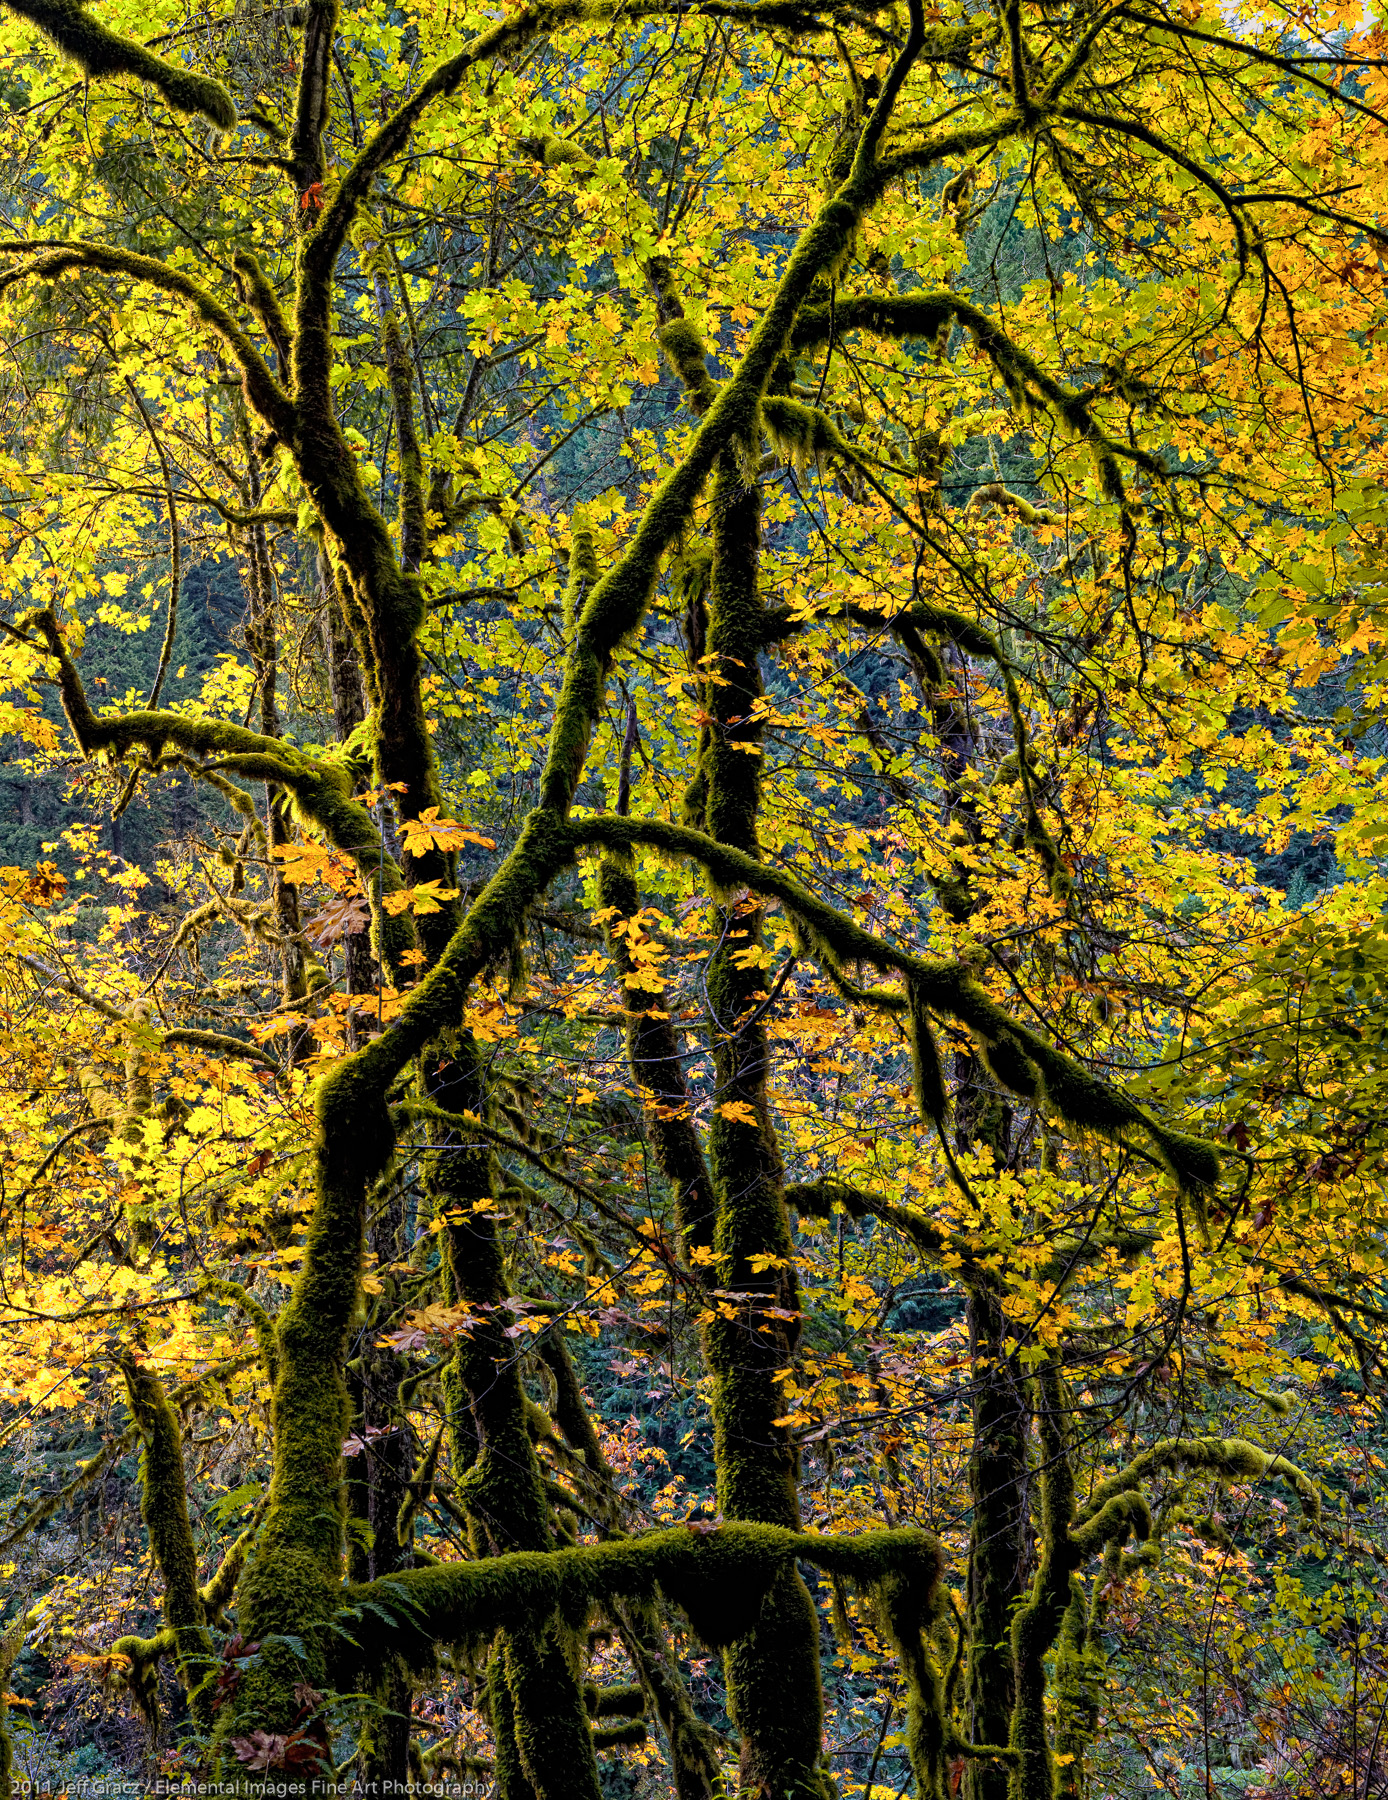 Eagel Creek Maples | Columbia River Gorge National Scenic Area | OR | USA - © 2011 Jeff Gracz / Elemental Images Fine Art Photography - All Rights Reserved Worldwide